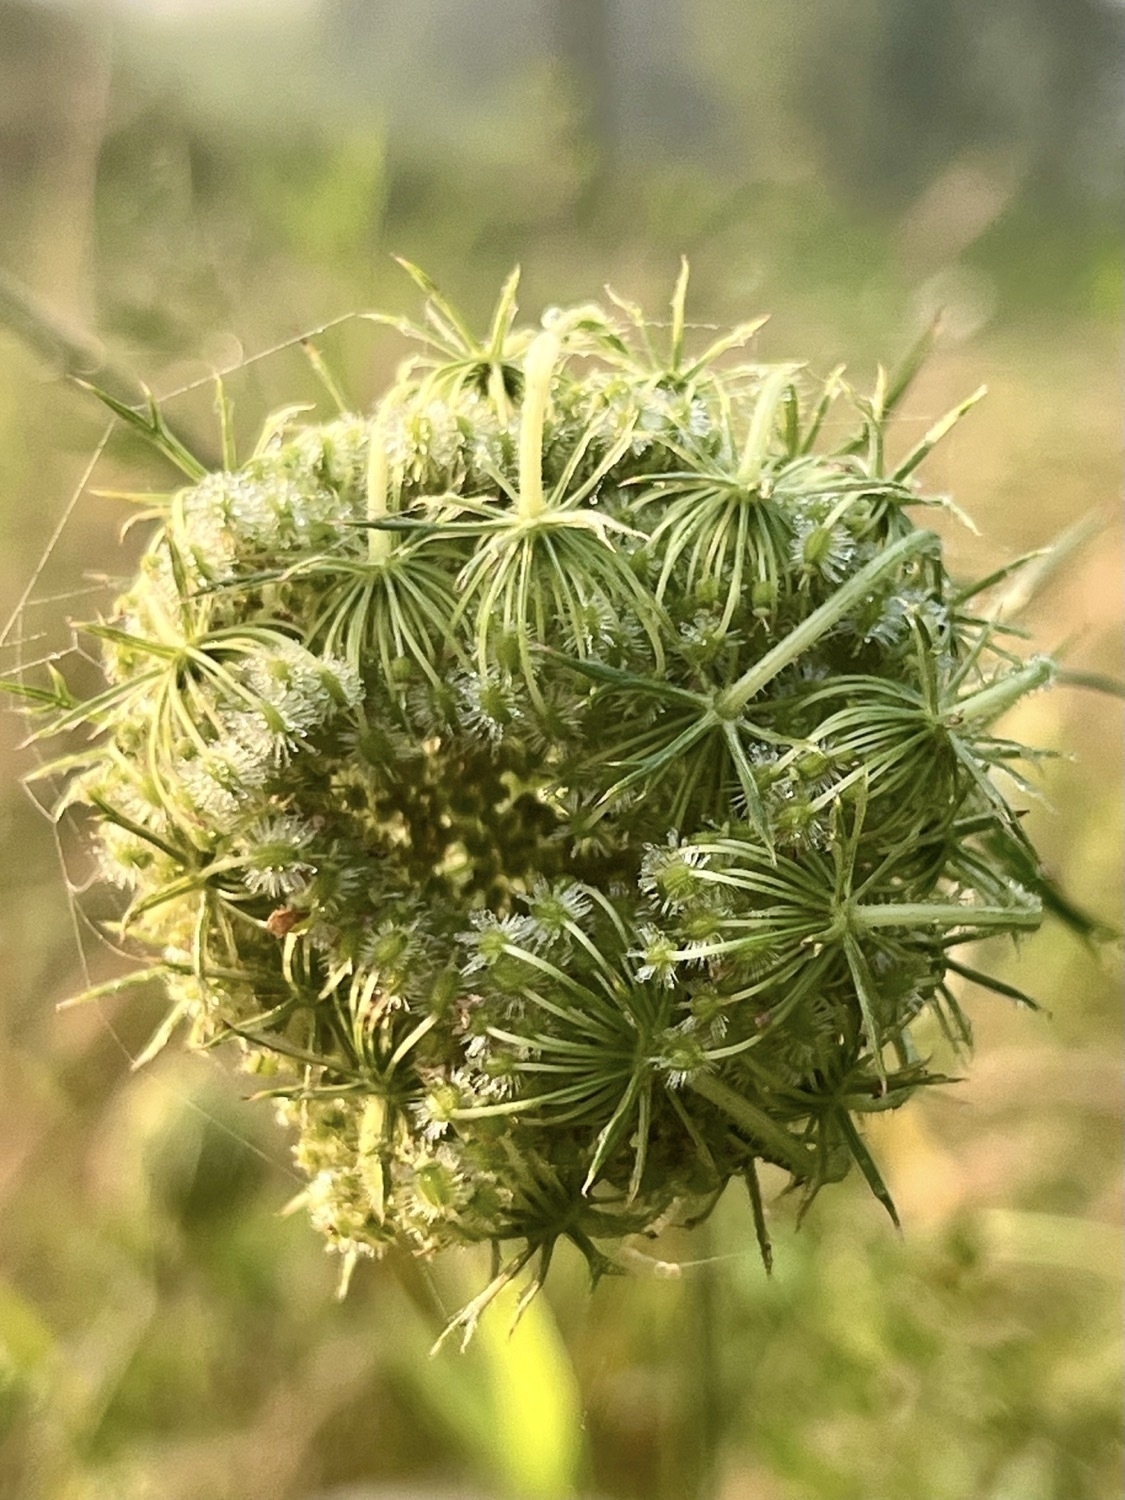 The green unopened flower cluster of Queen Anne’s Lace which consists of the many green stems folded in on themselves, forming a spherical shape